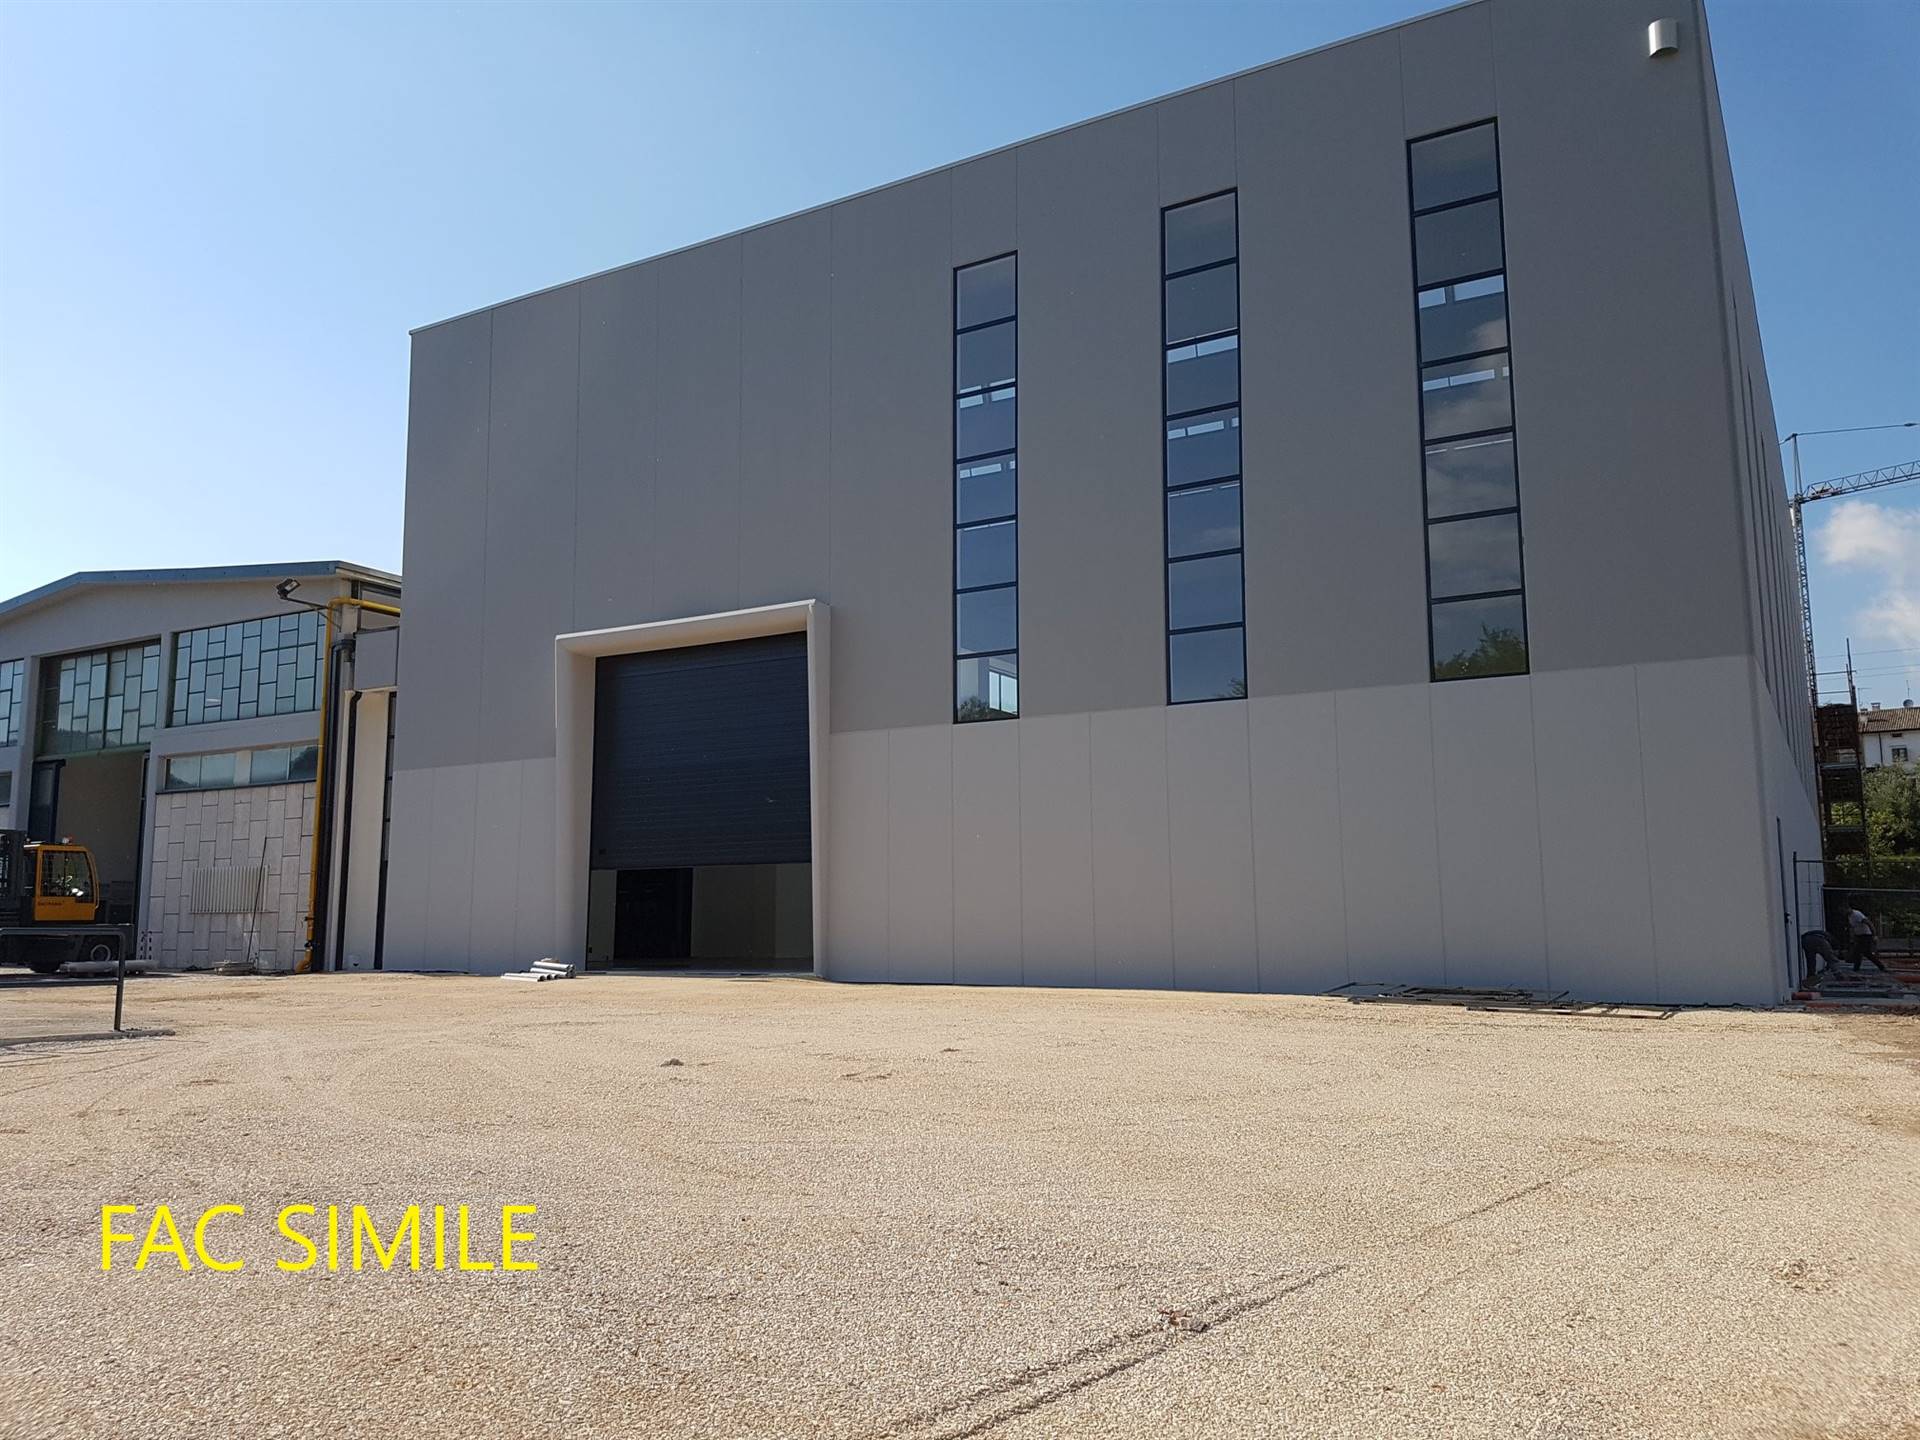 CAMPI BISENZIO, Industrial warehouse for sale, Energetic class: G, placed at Buried on 1, composed by: , Price: € 2,760,000